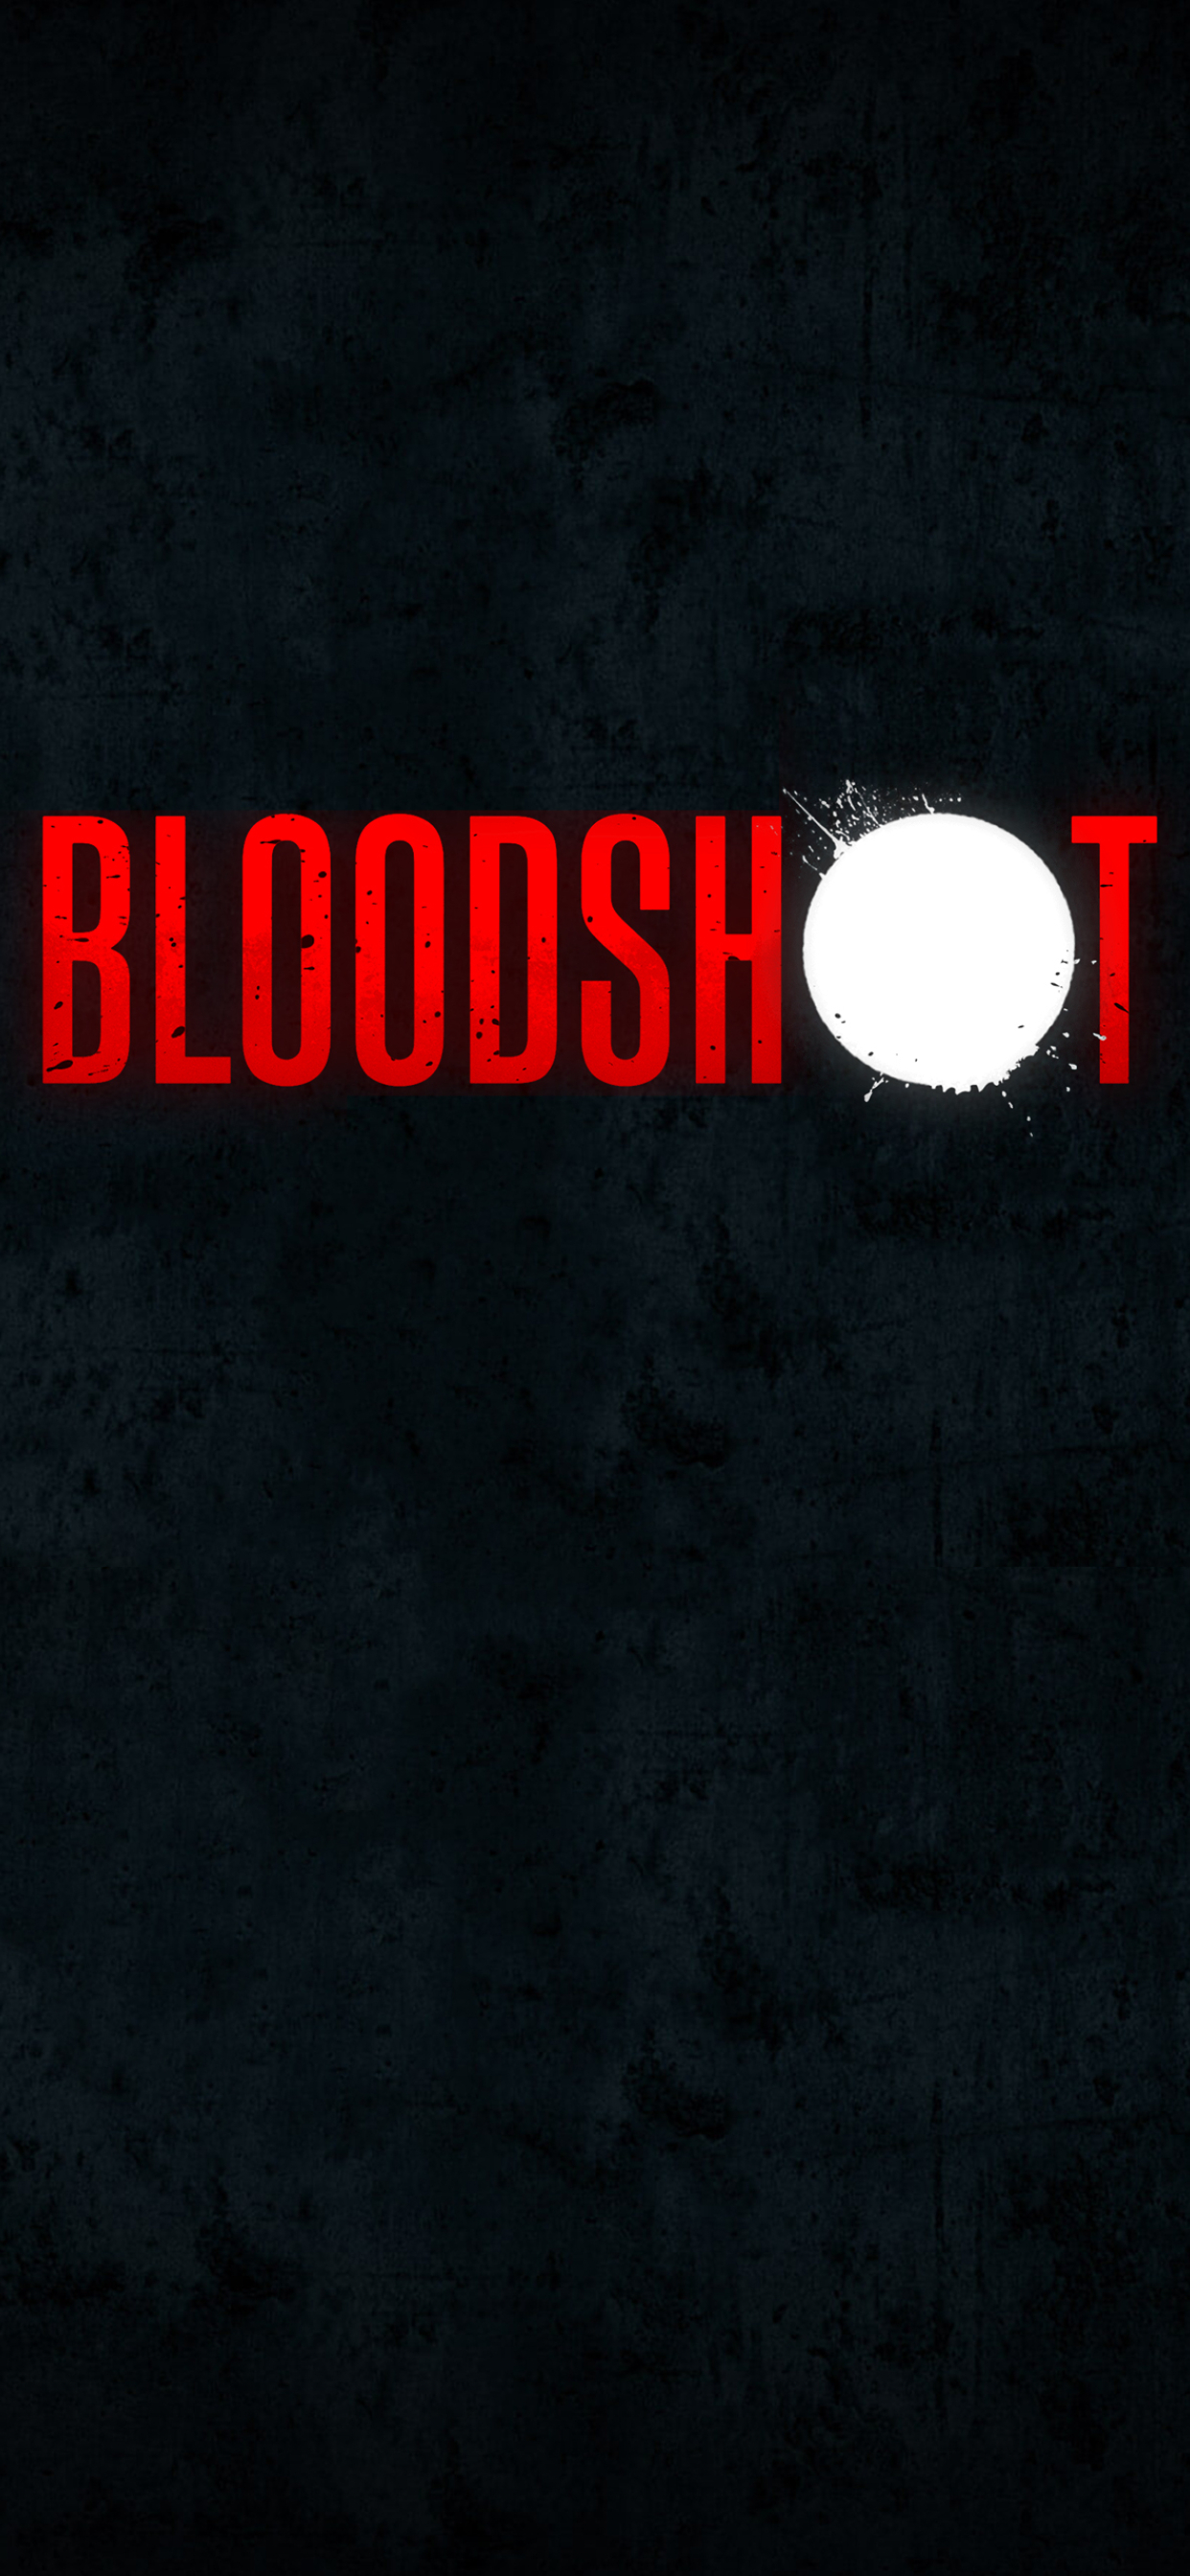 download where can i see the movie bloodshot